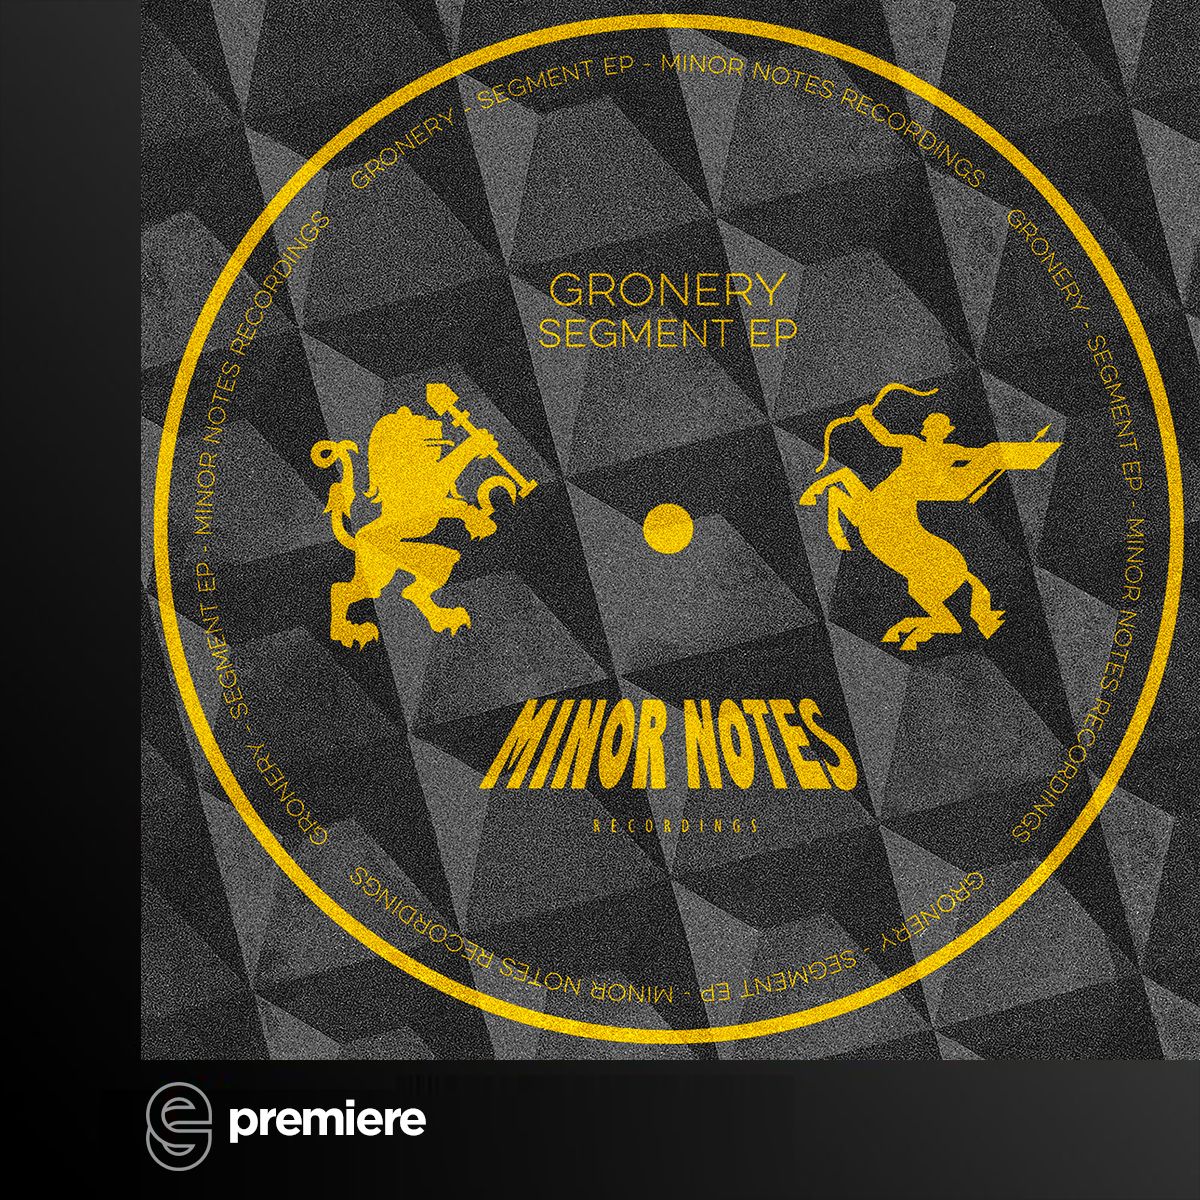 Download Premiere: Gronery - Bouncing On Ya - Minor Notes Recordings